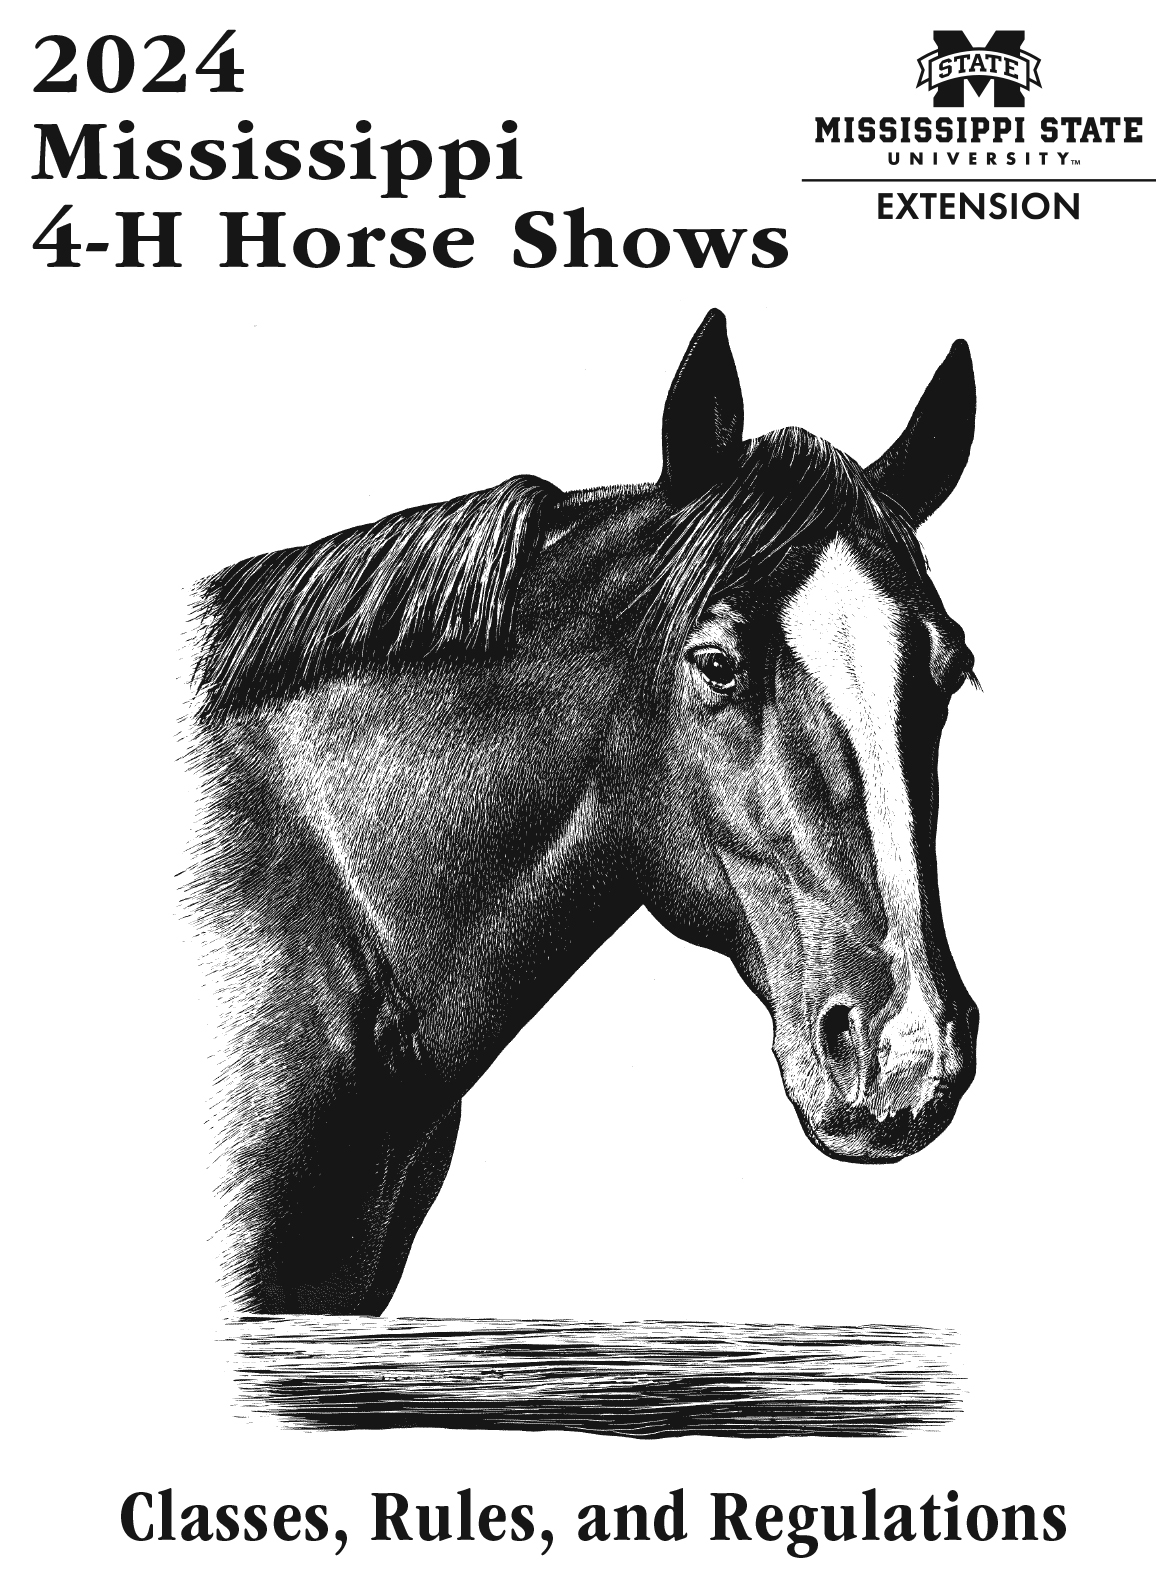 The front cover of this publication has a realistic drawing of a horse and the text 2024 Mississippi 4-H Horse Shows: Classes, Rules, and Regulations.